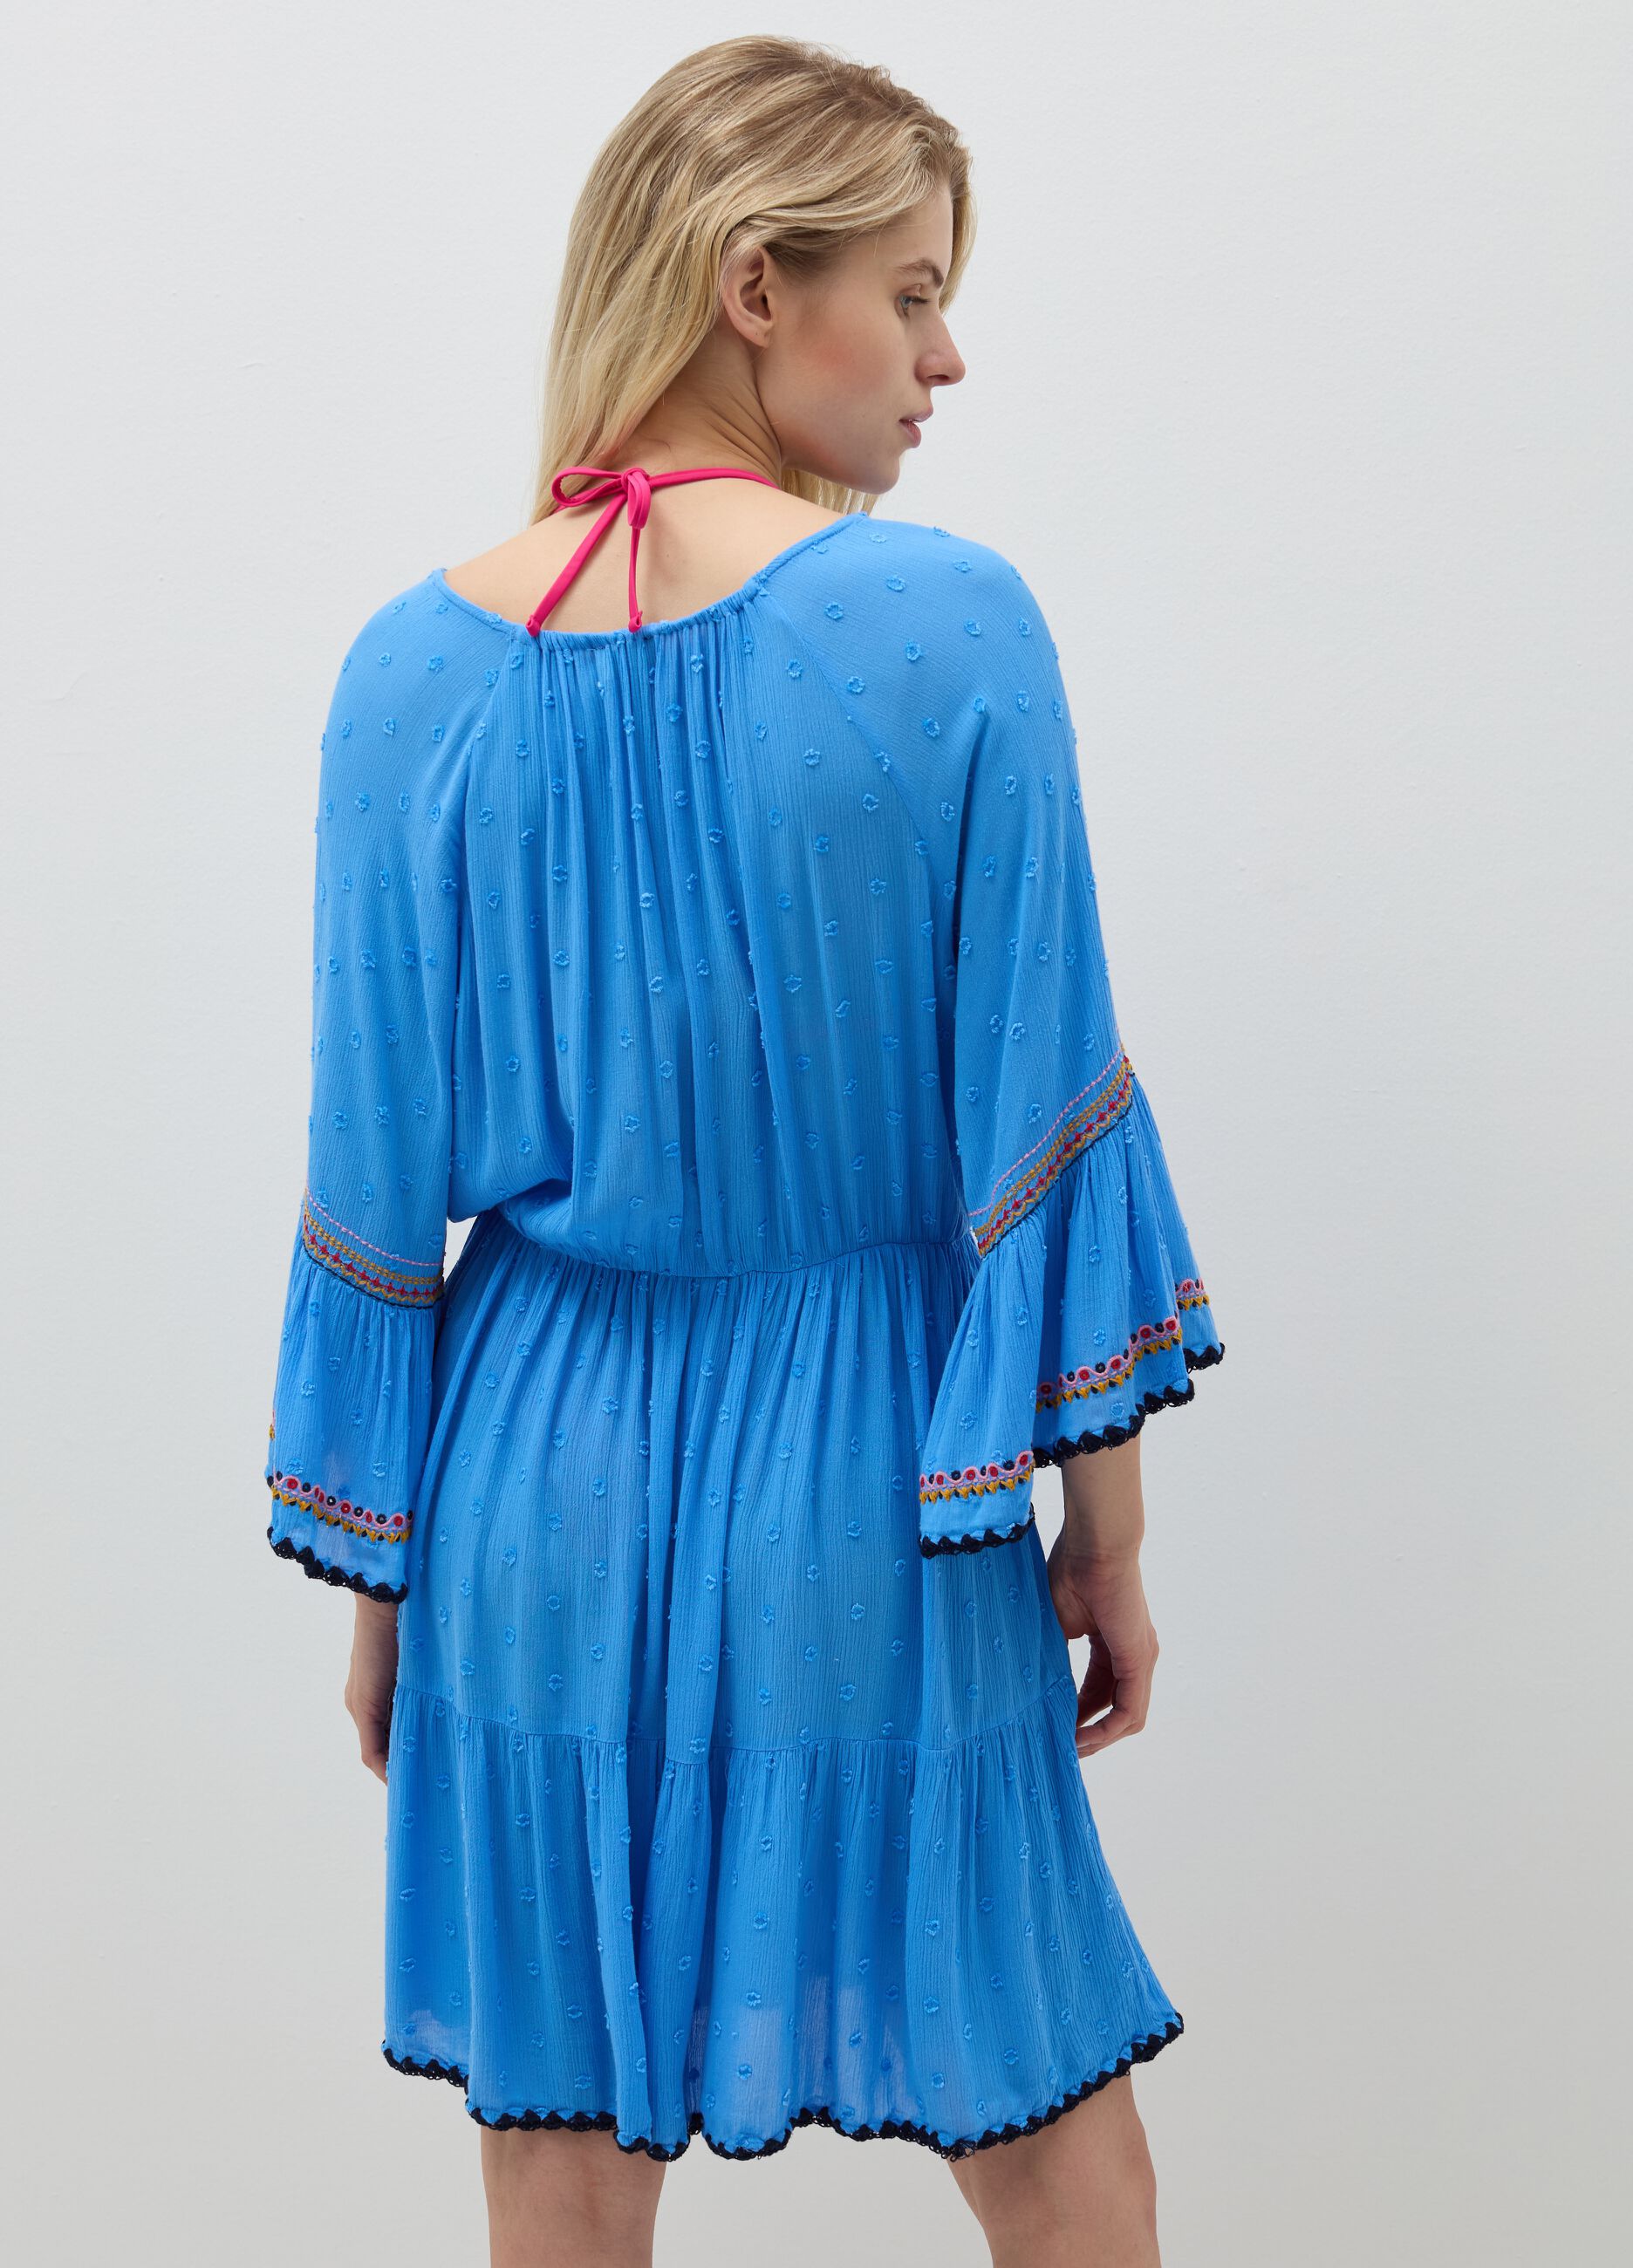 Positano summer dress with ethnic embroidery